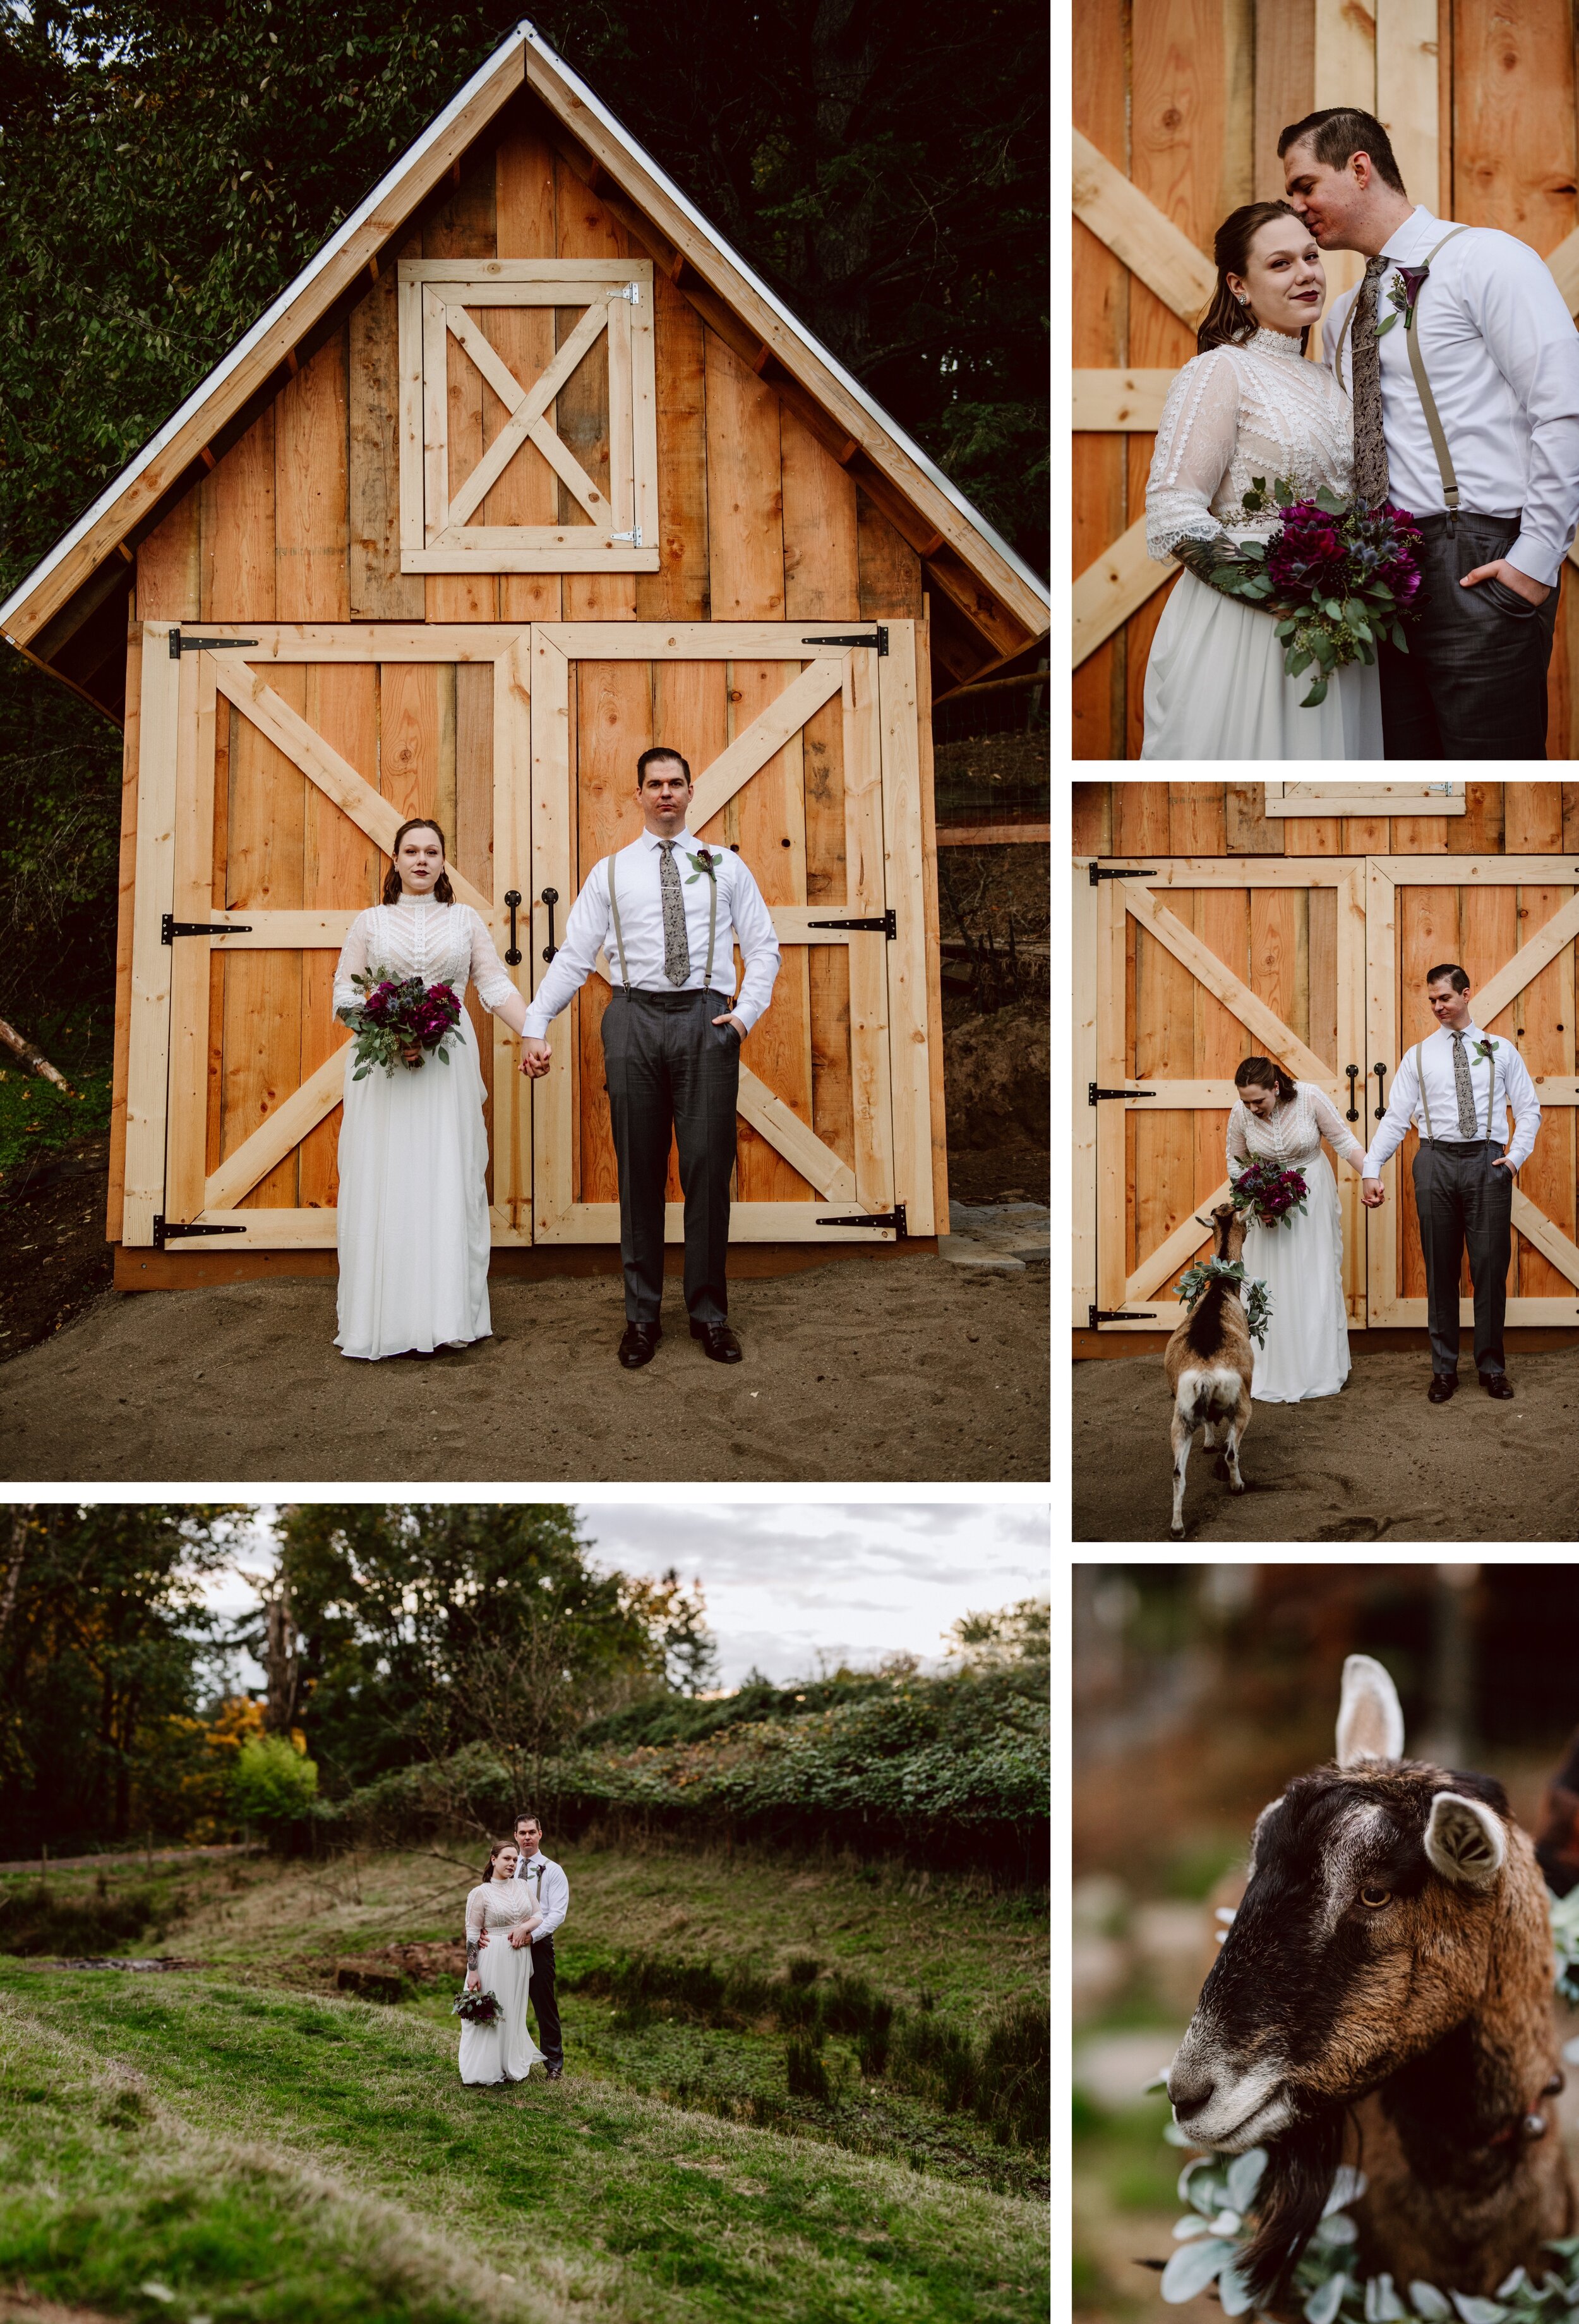 Bride and groom portraits in front of a homemade miniature barn at sunset with goats